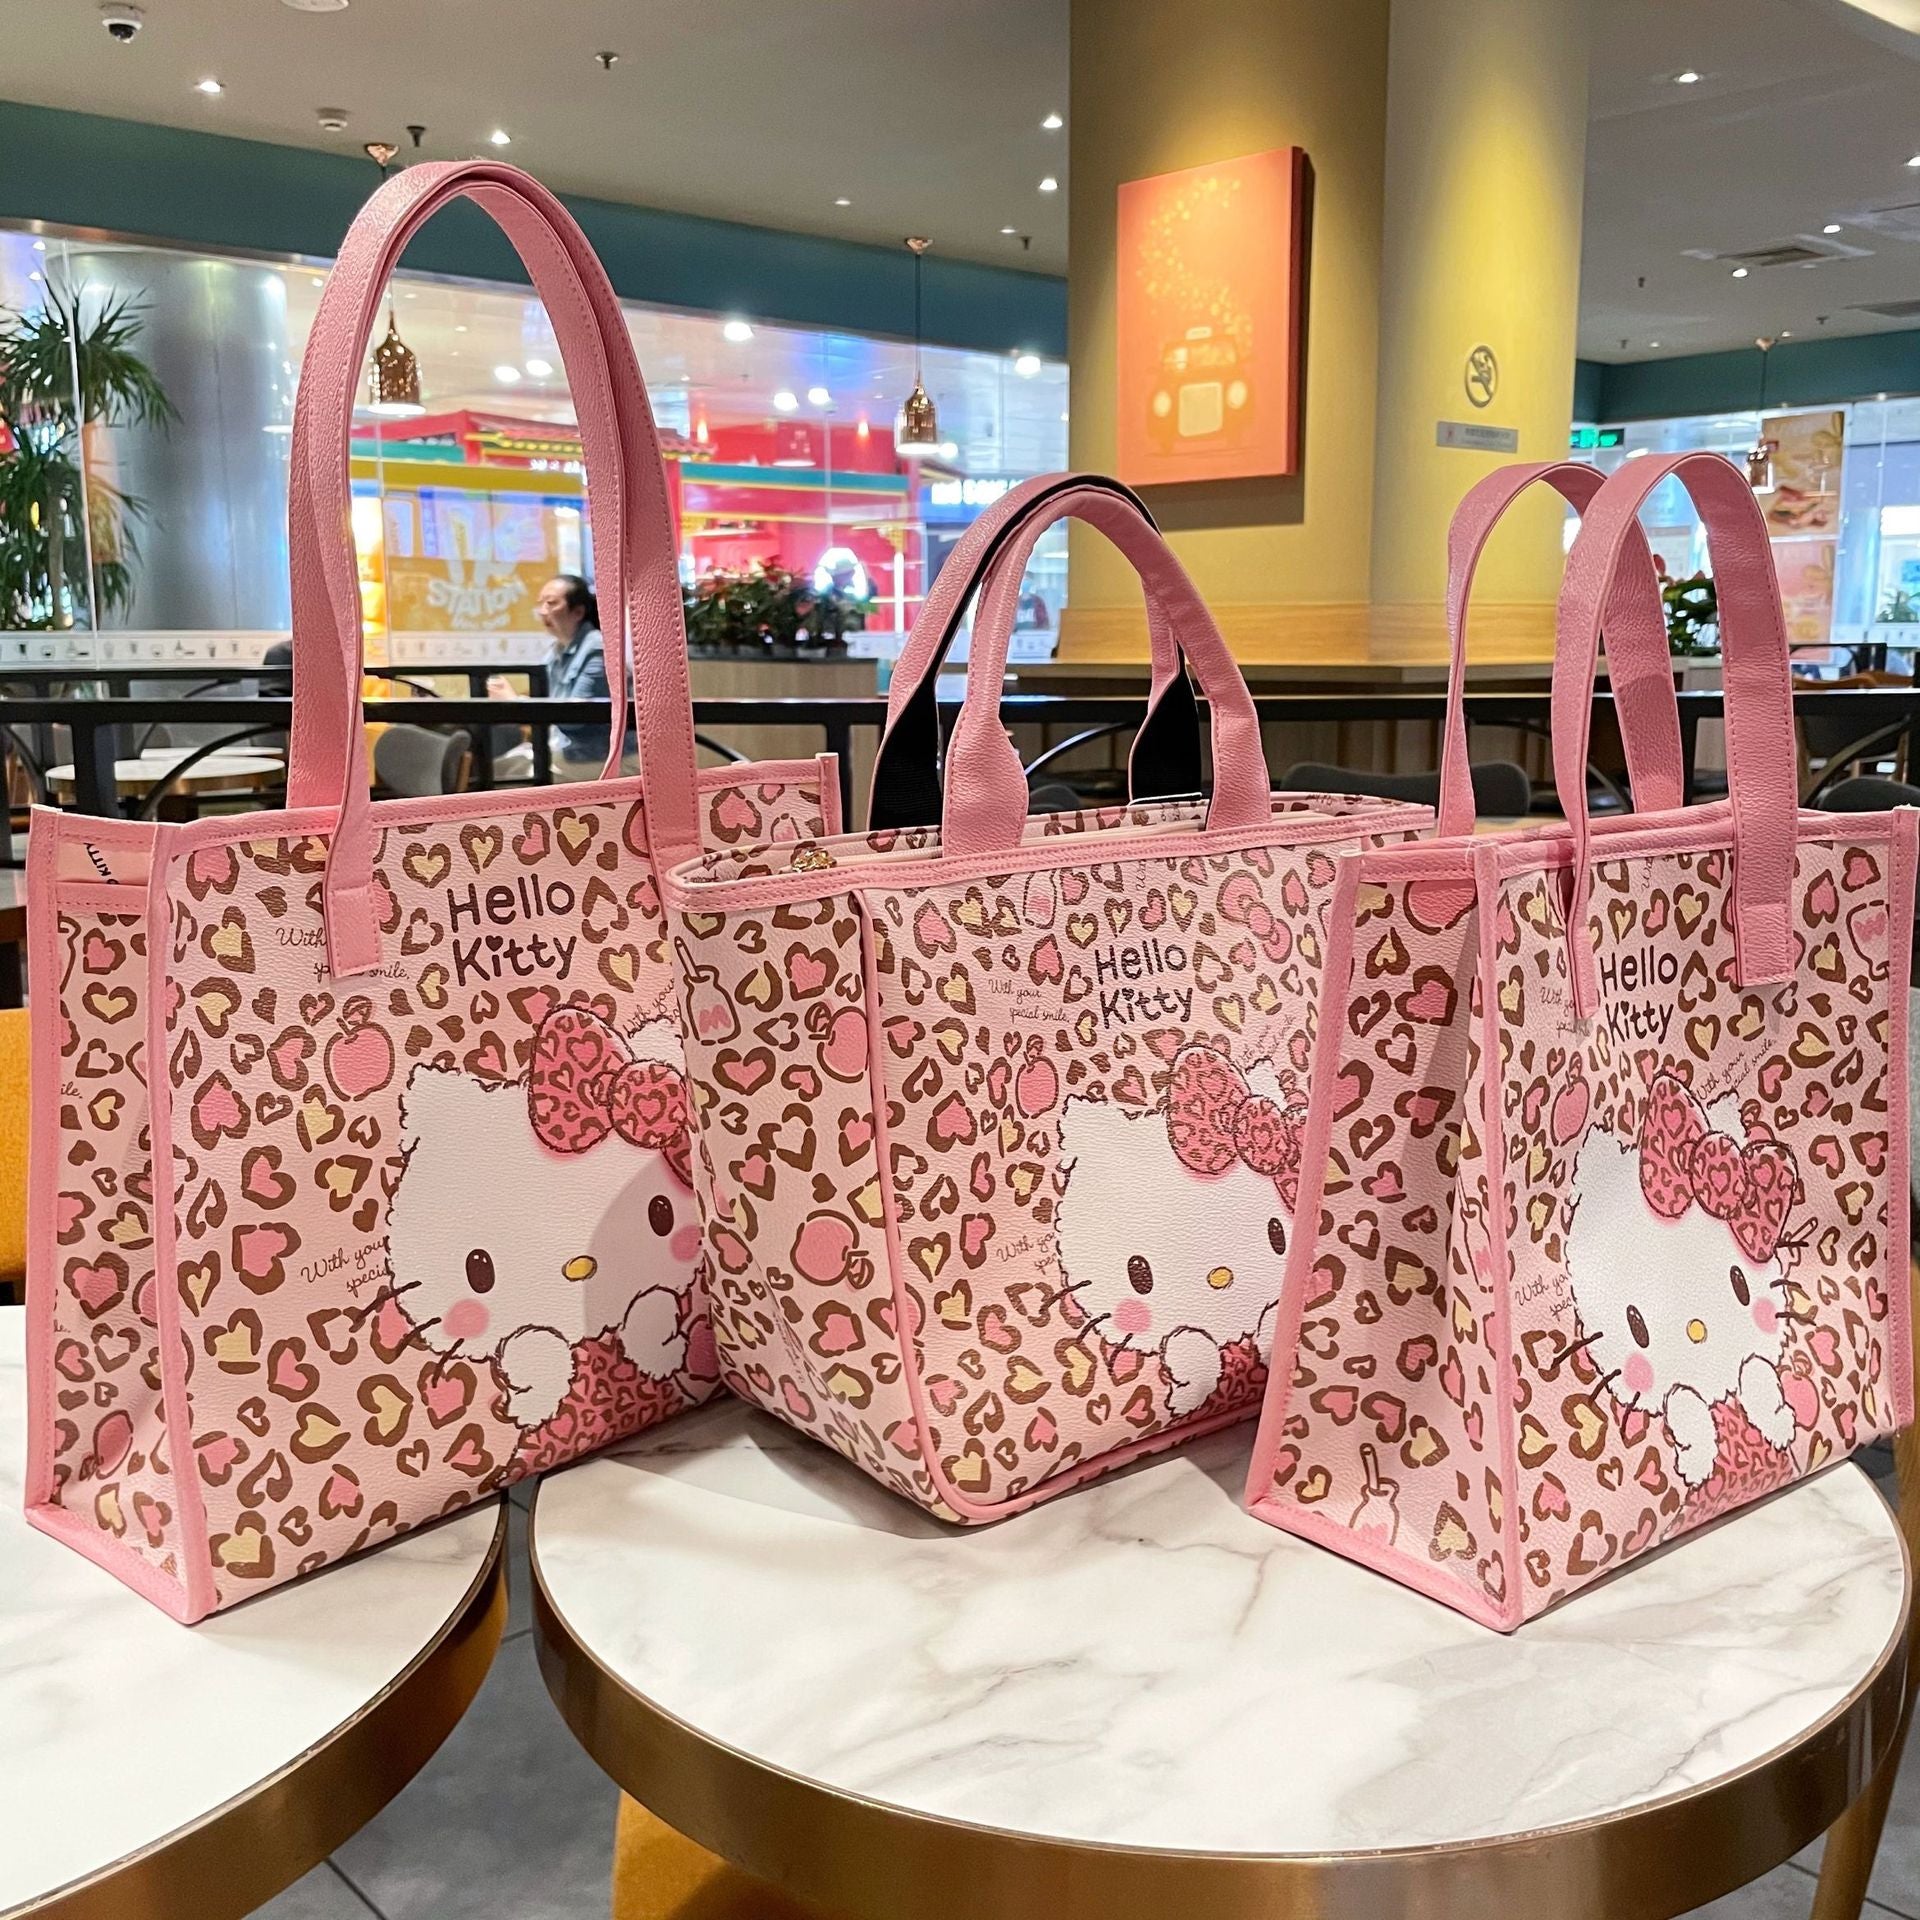 These Hello Kitty Bags From Urban Outfitters are Eco-Friendly